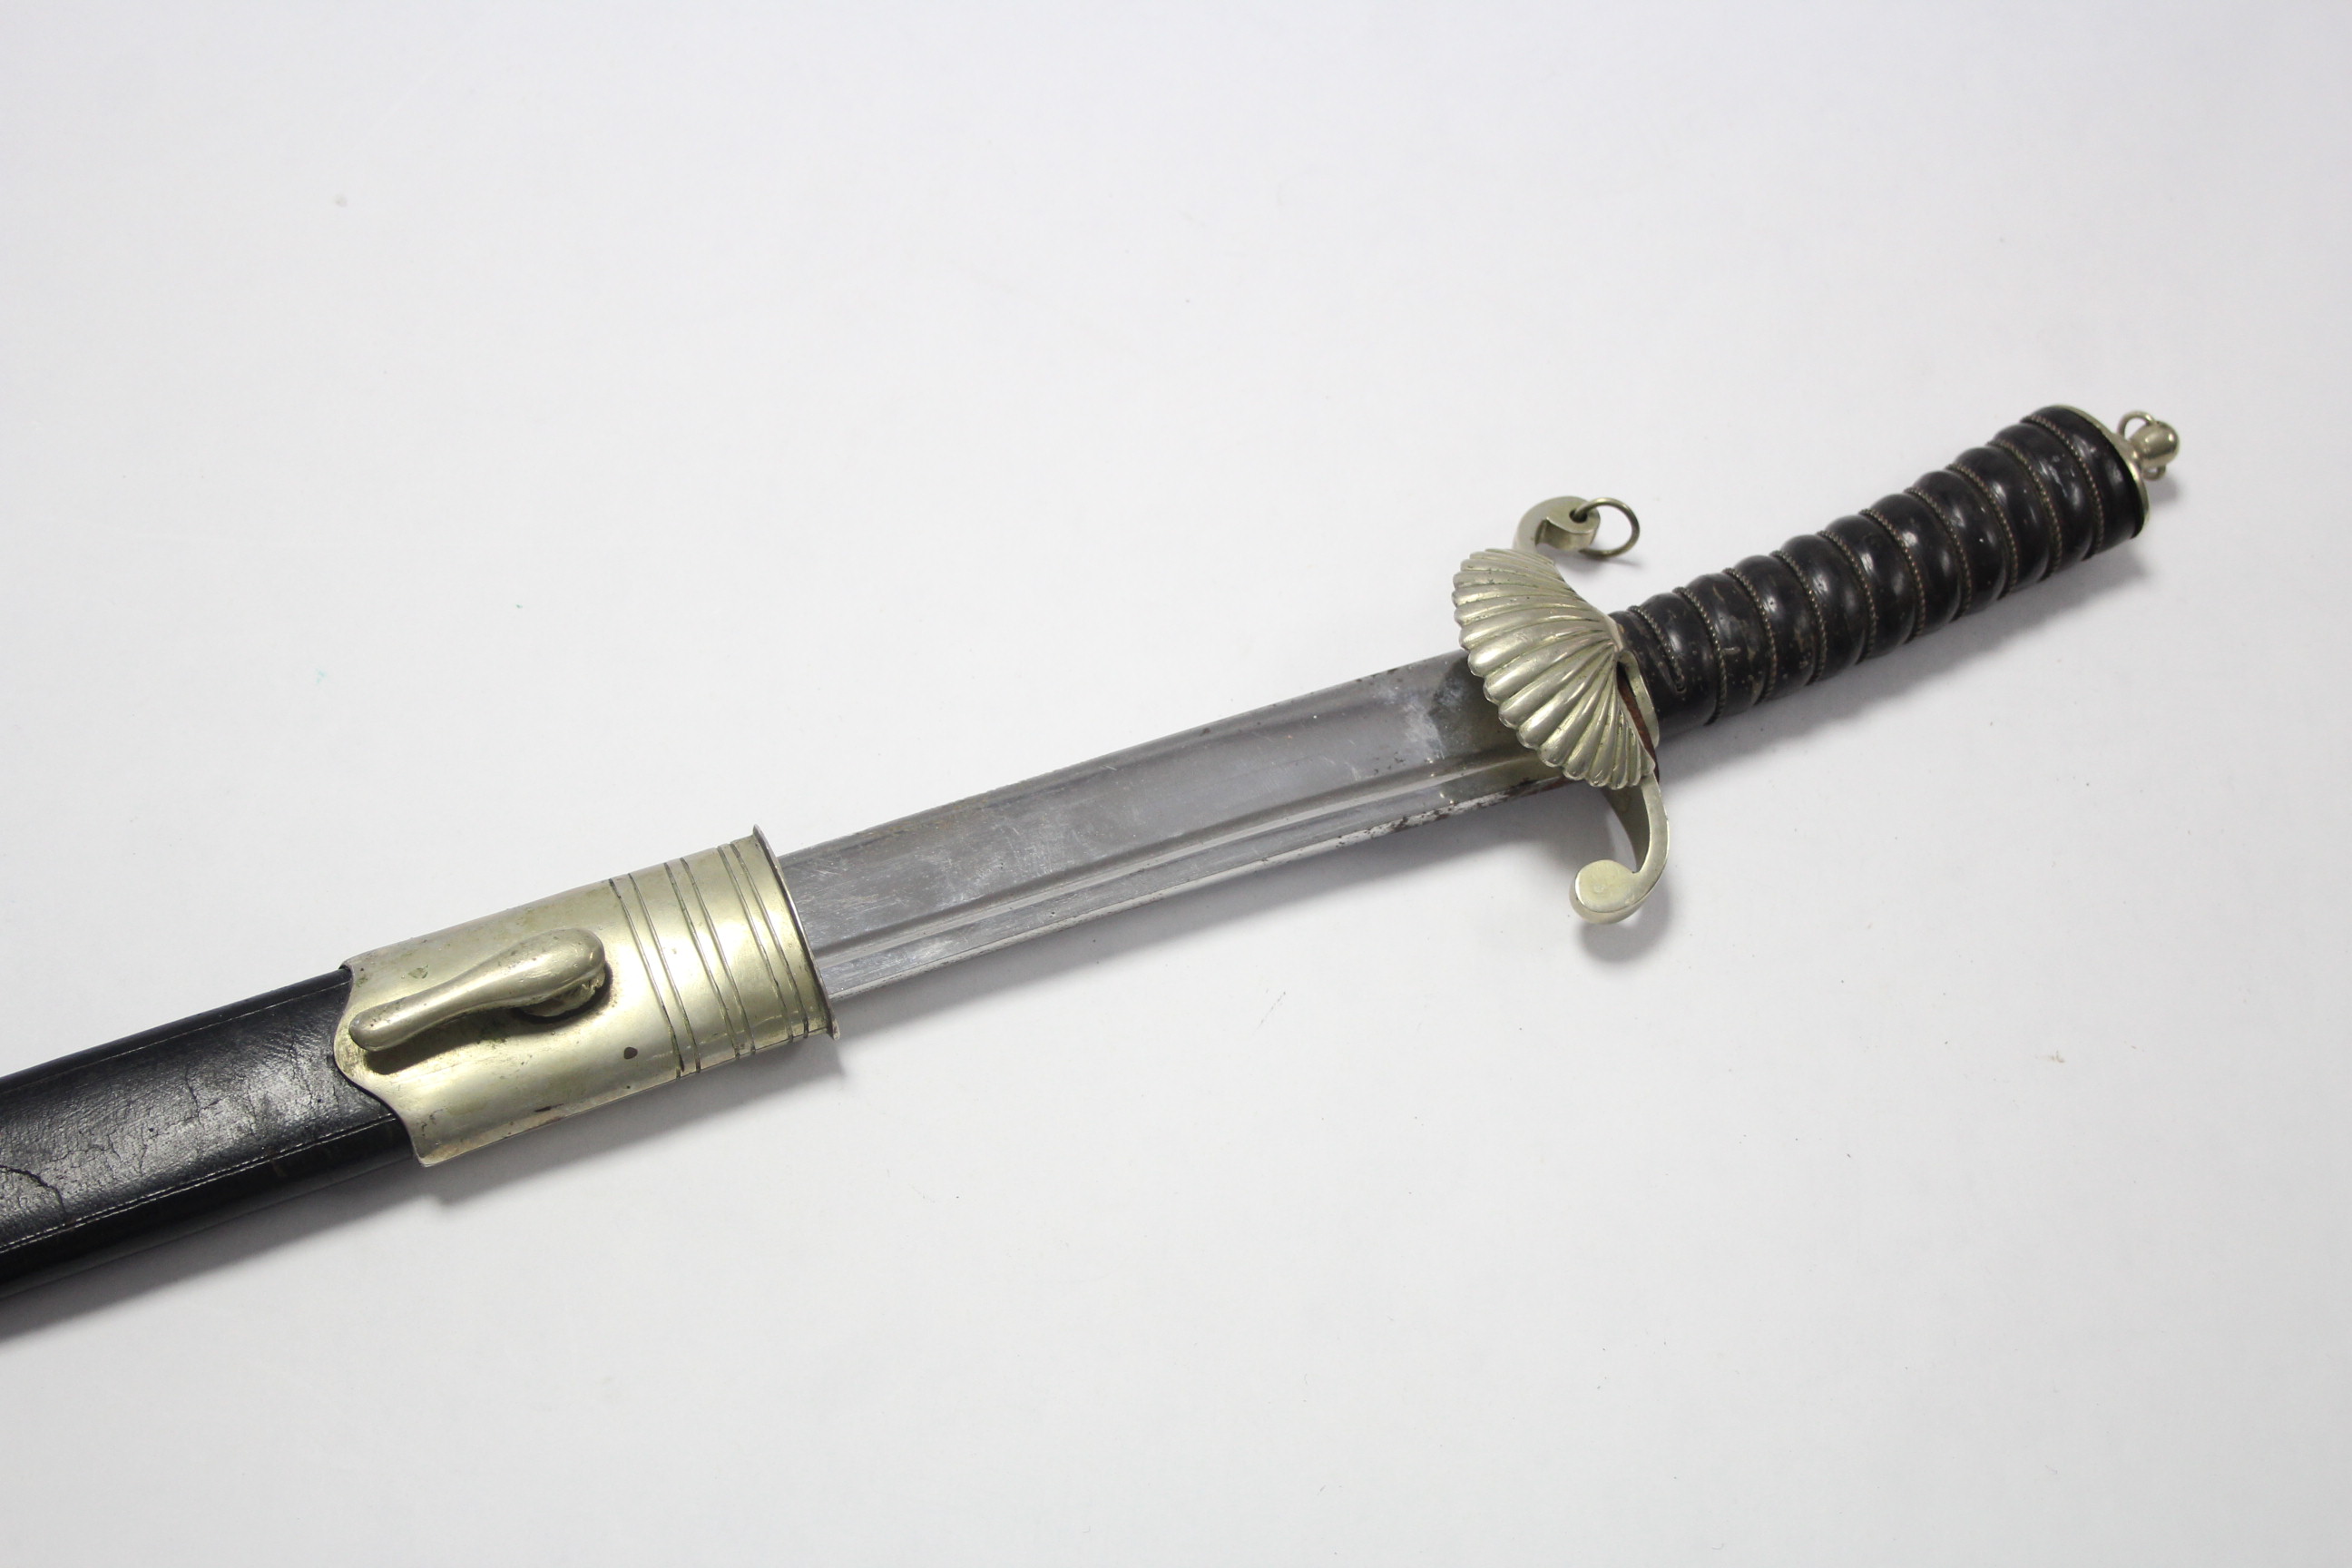 AN 18th CENTURY-STYLE GERMAN(?) HUNTING SWORD, with 24¾” long single-edge curved blade, with wire